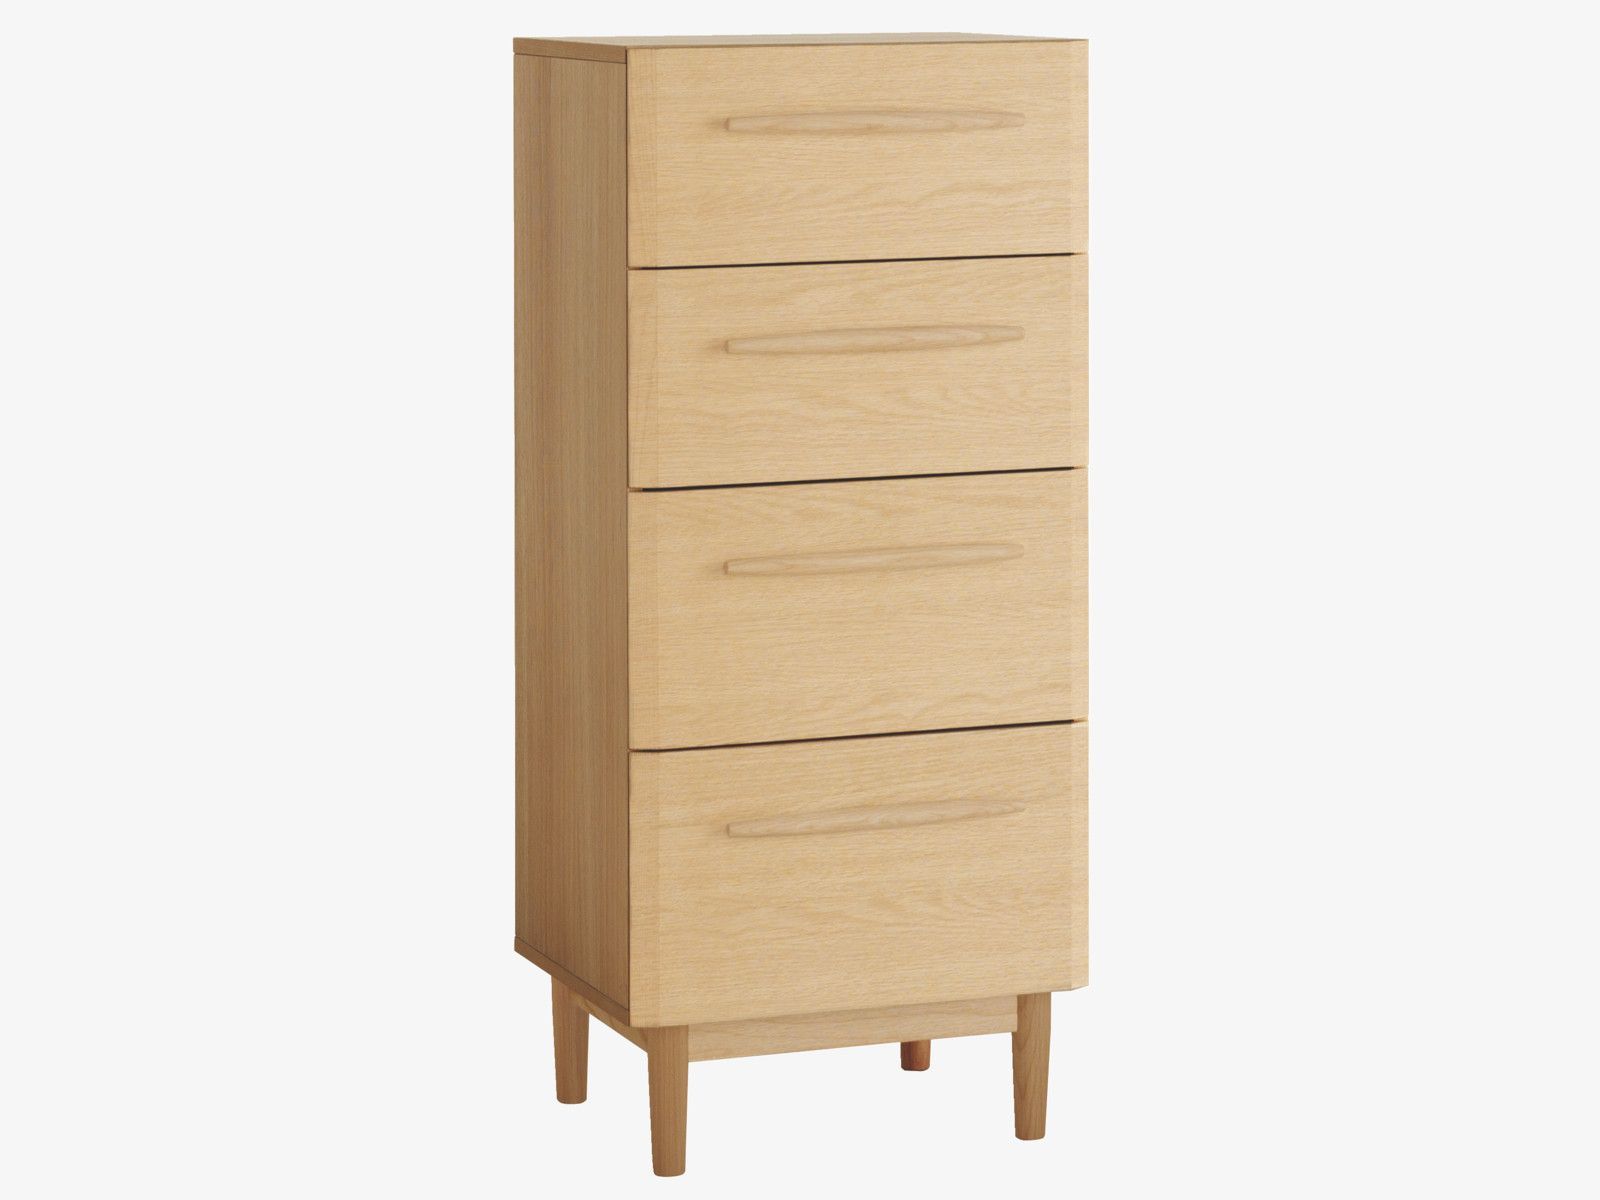 Aggy Natural Wood Oak 4 Drawer Tall Chest – Bedroom Furniture In Natural Peroba 4 Drawer Wood Desks (View 12 of 15)